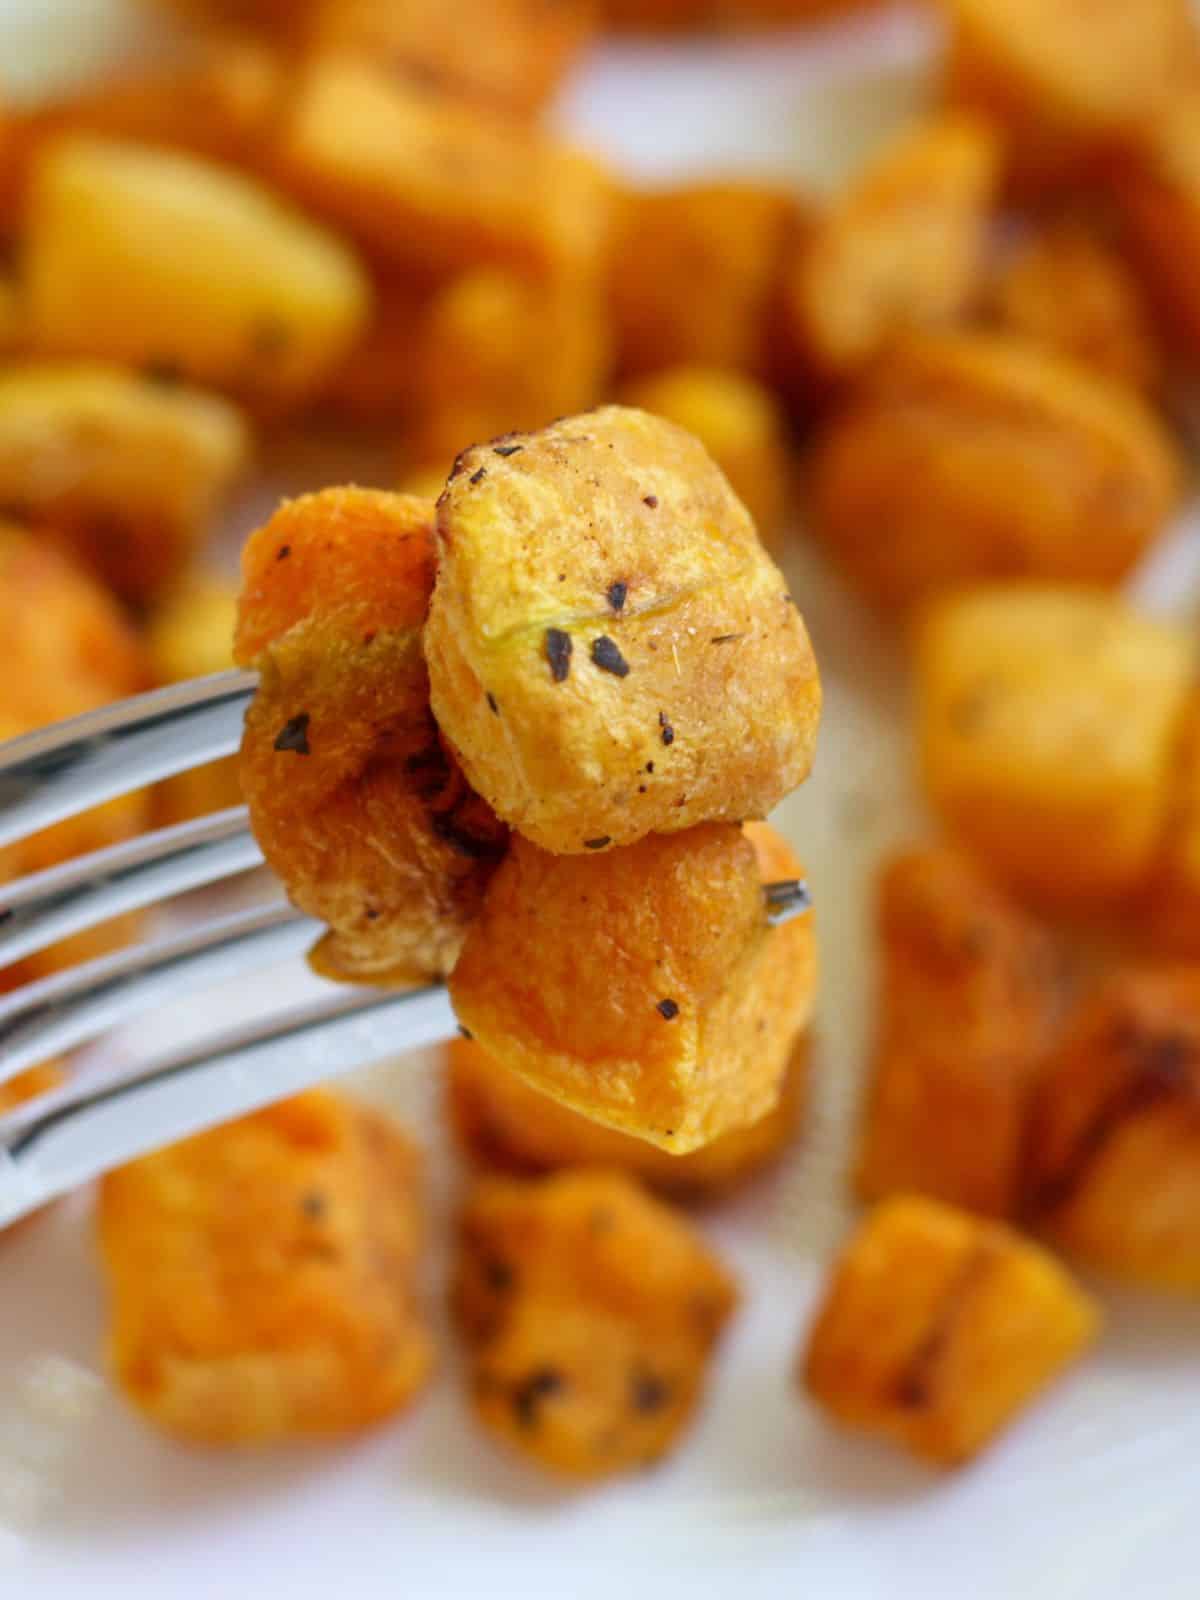 A close-up shot of a fork with 3 cubes of roasted squash and a blurred background with the rest of the vegetables.